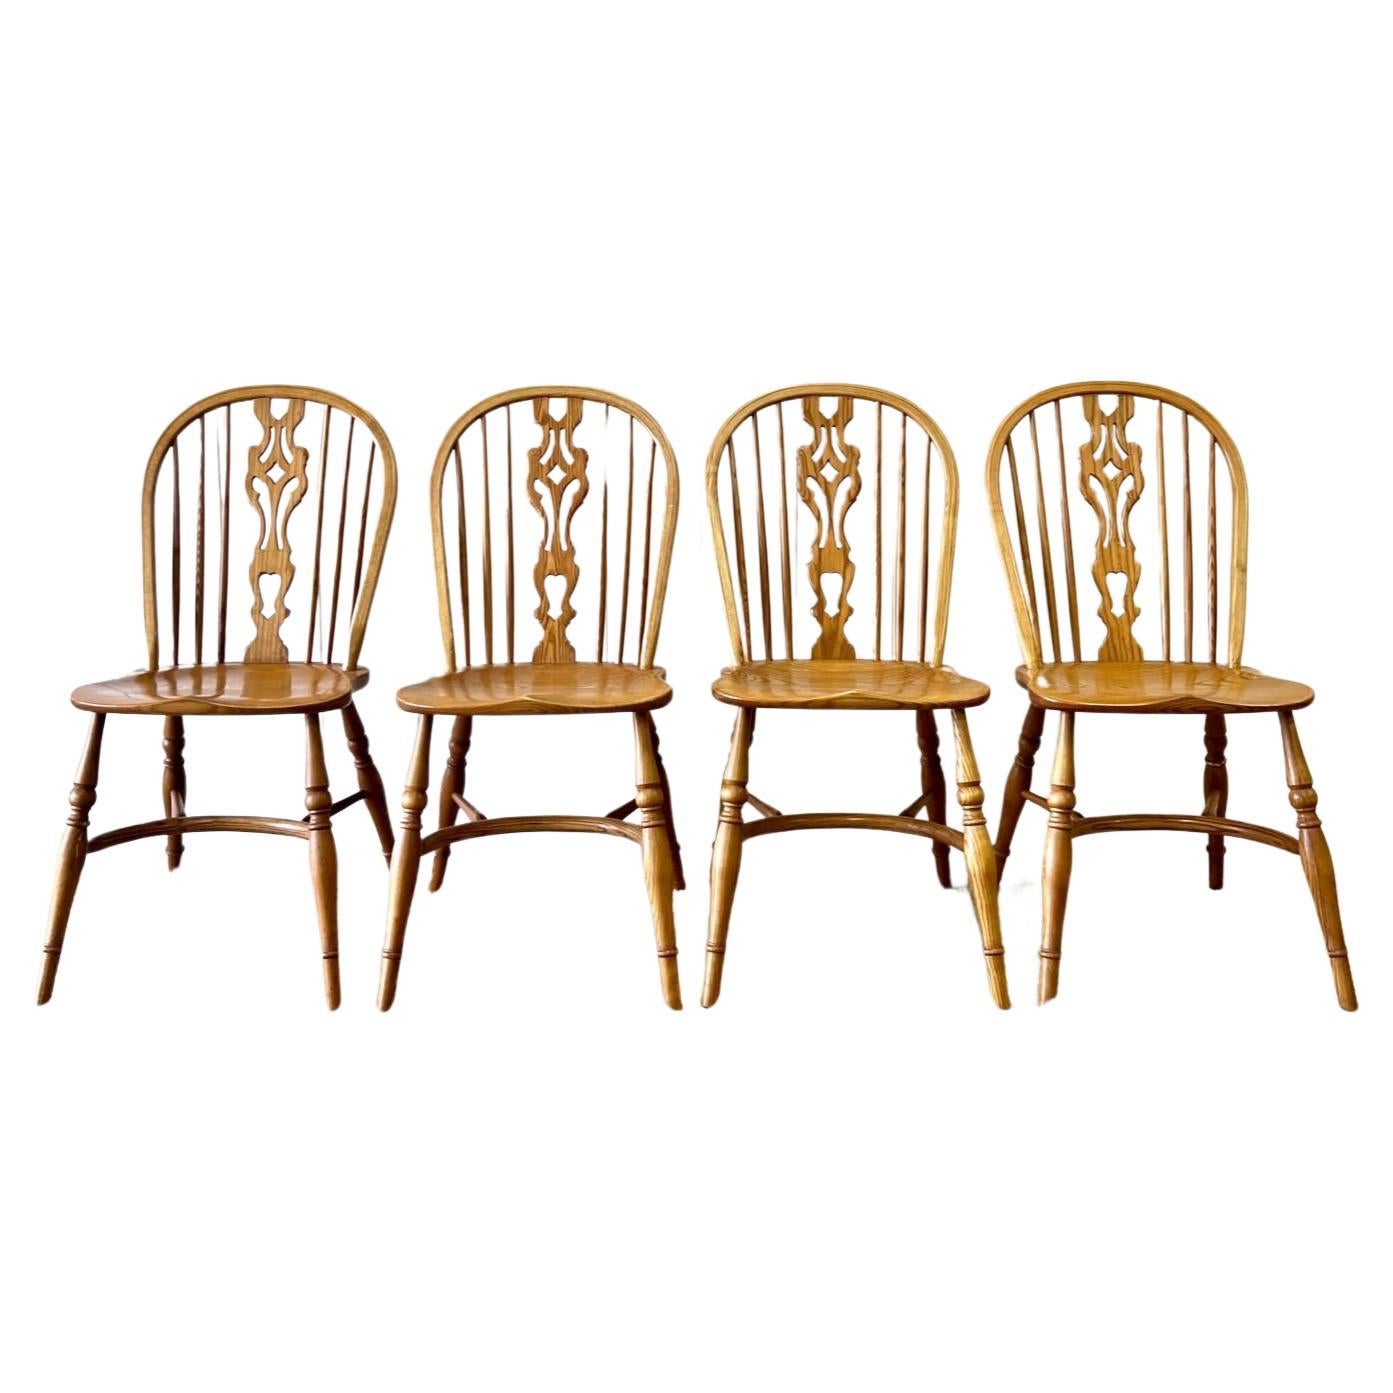 A Set of Four Ash Crinoline Stretcher Windsor Chairs For Sale